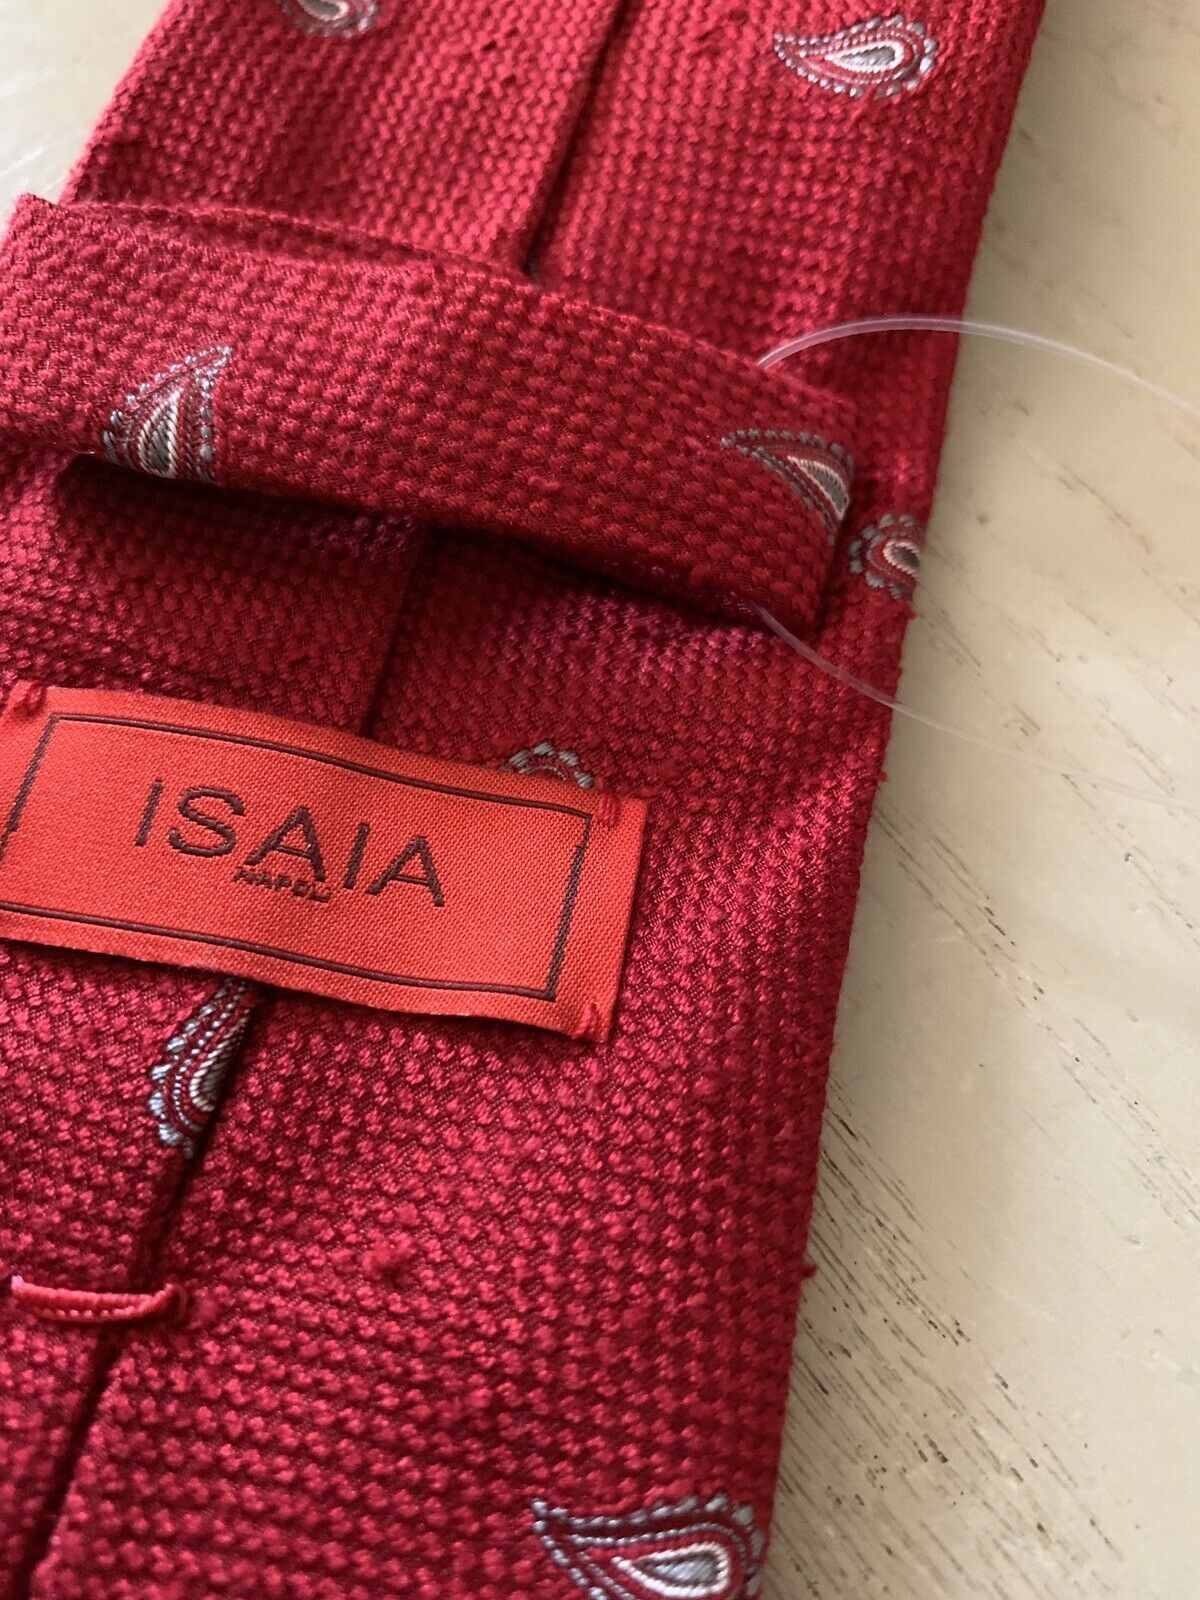 New $225 Isaia Silk Neck Tie Red Made in Italy